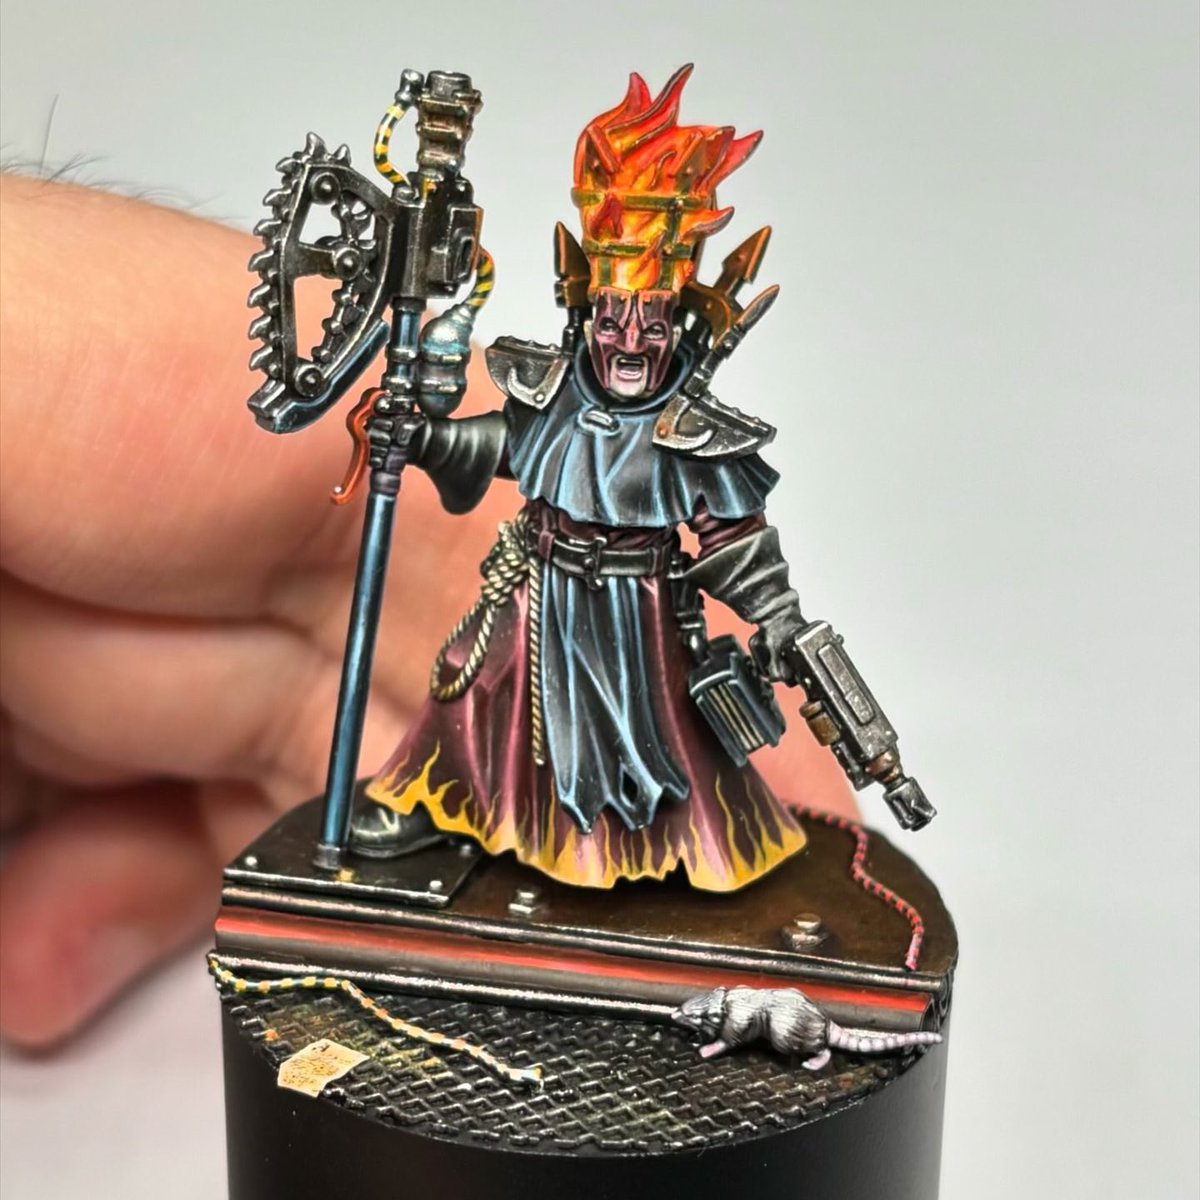 Cawdor Redemptionist. There’s a complete set of tutorials on how this model was painted (including a guide on how the base was built) available on my Patreon.